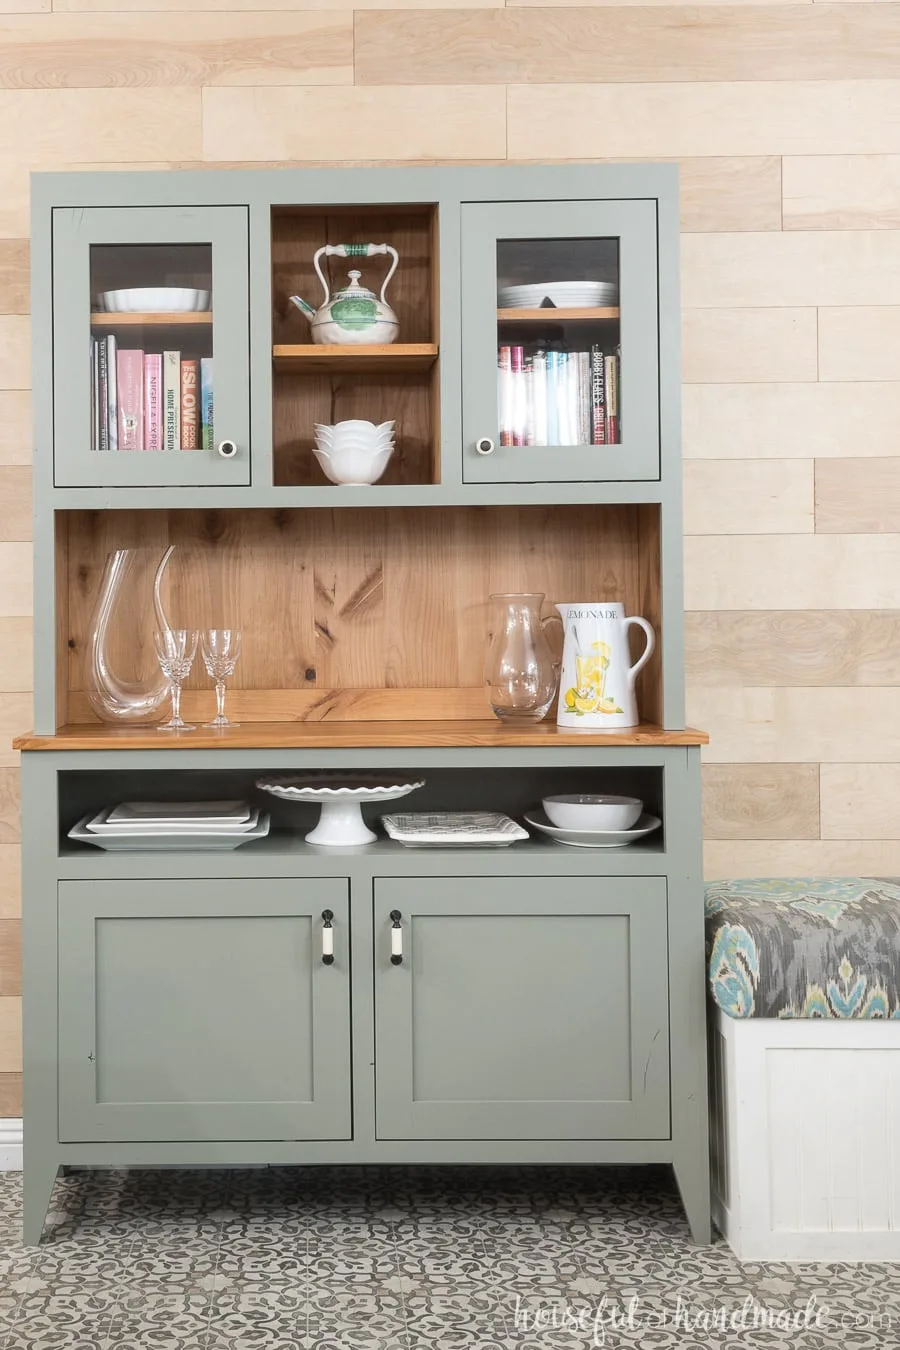 Gorgeous gray dining room hutch with natural knotty wood in the inside. Lots of storage and display space.